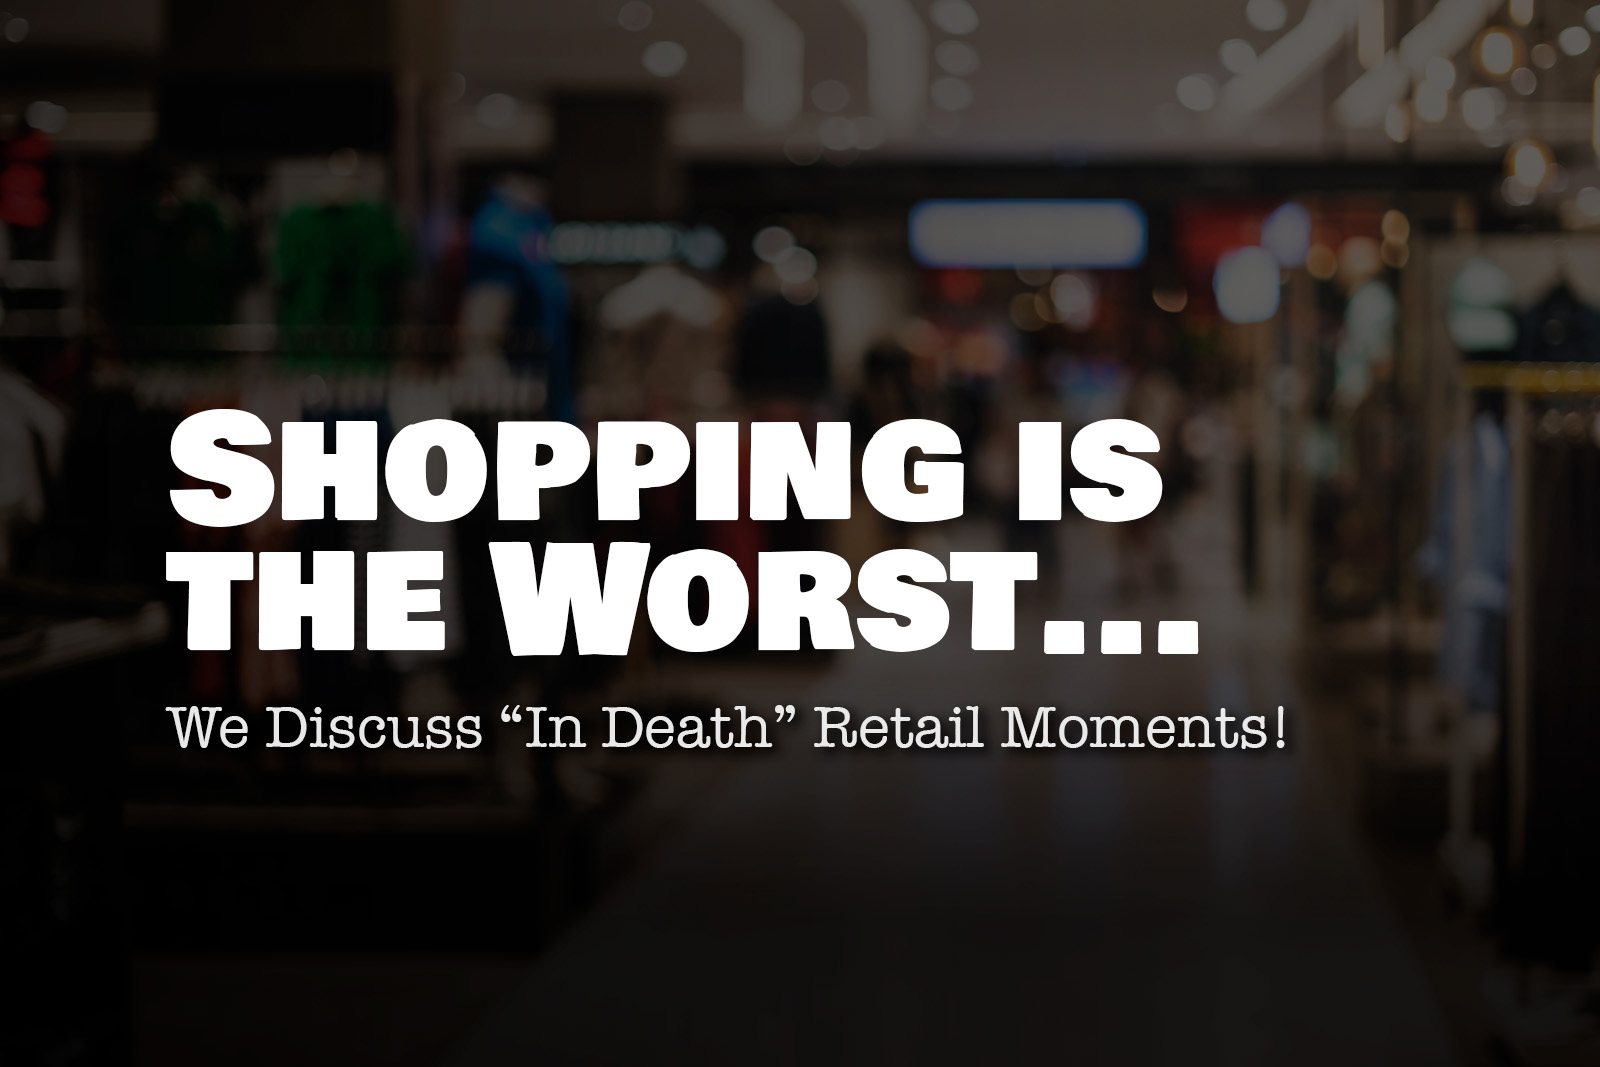 Shopping is the Worst! Retail Moments in the “In Death” Series